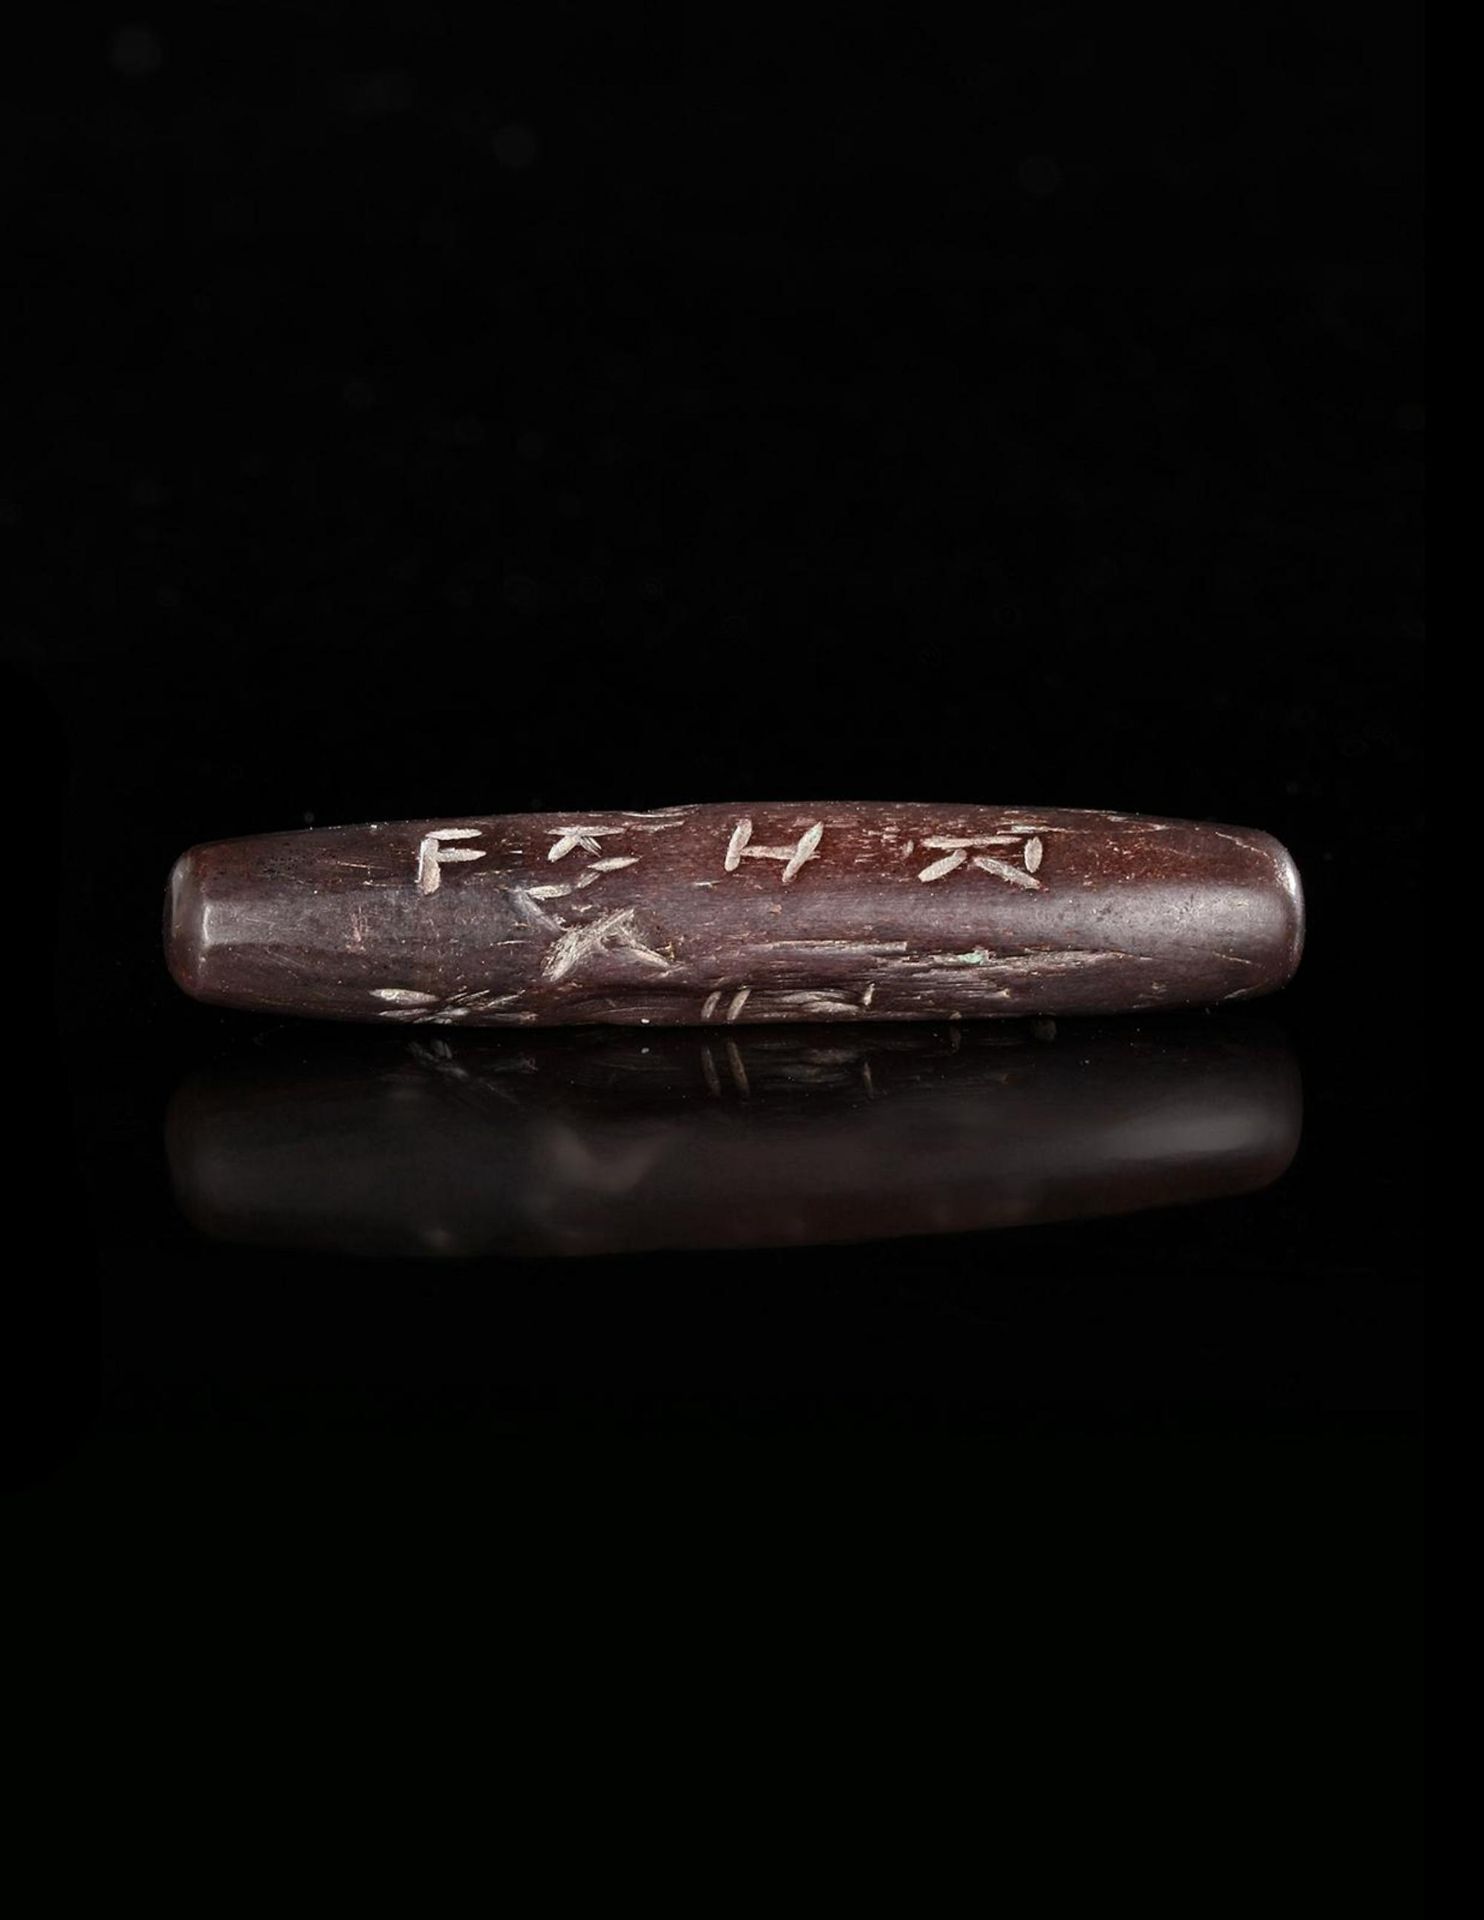 A ROMAN HEMATITE MAGICAL AMULET, CIRCA 2ND-4TH CENTURY A.D. - Image 2 of 2